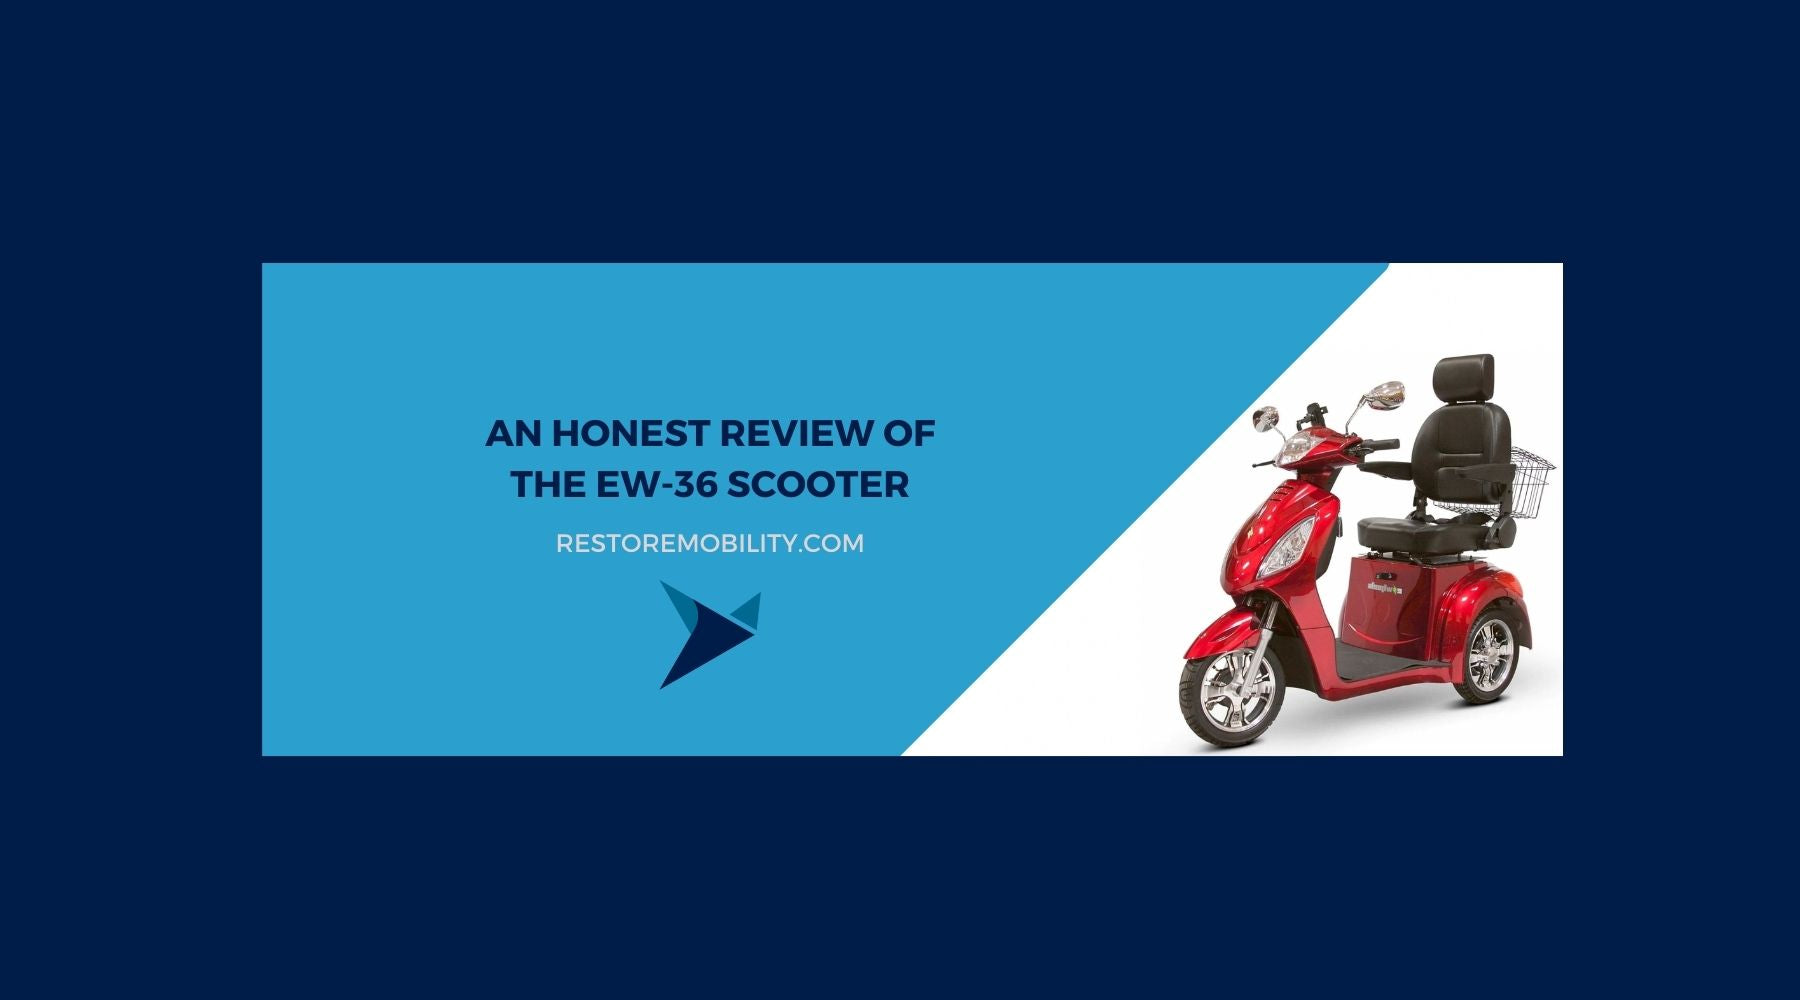 An Honest Review of The EW-36 Scooter by EWheels